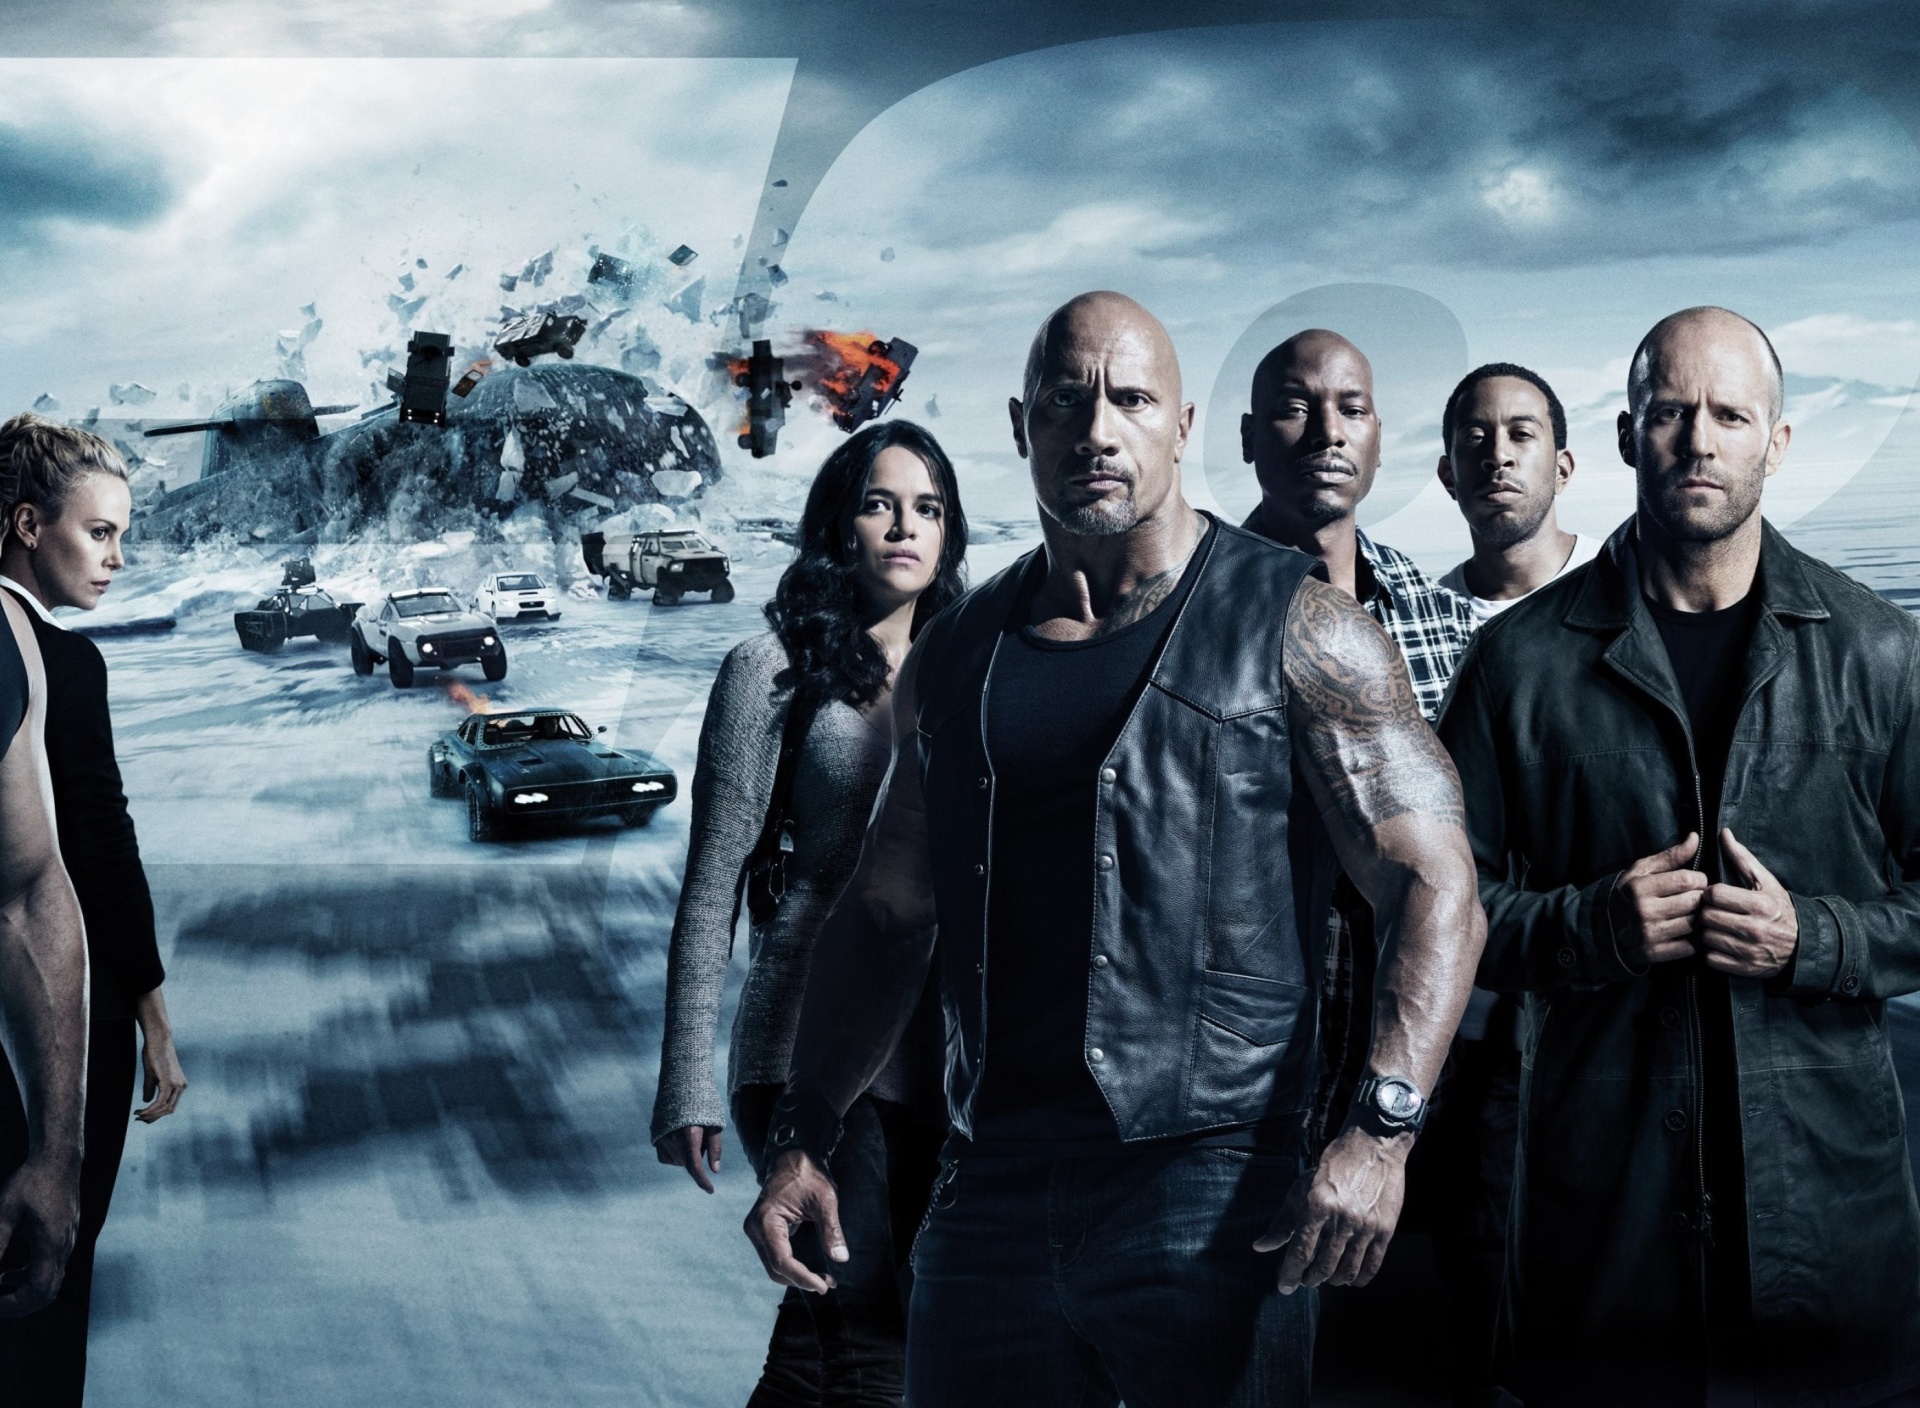 Das The Fate of the Furious with Vin Diesel, Dwayne Johnson, Charlize Theron Wallpaper 1920x1408